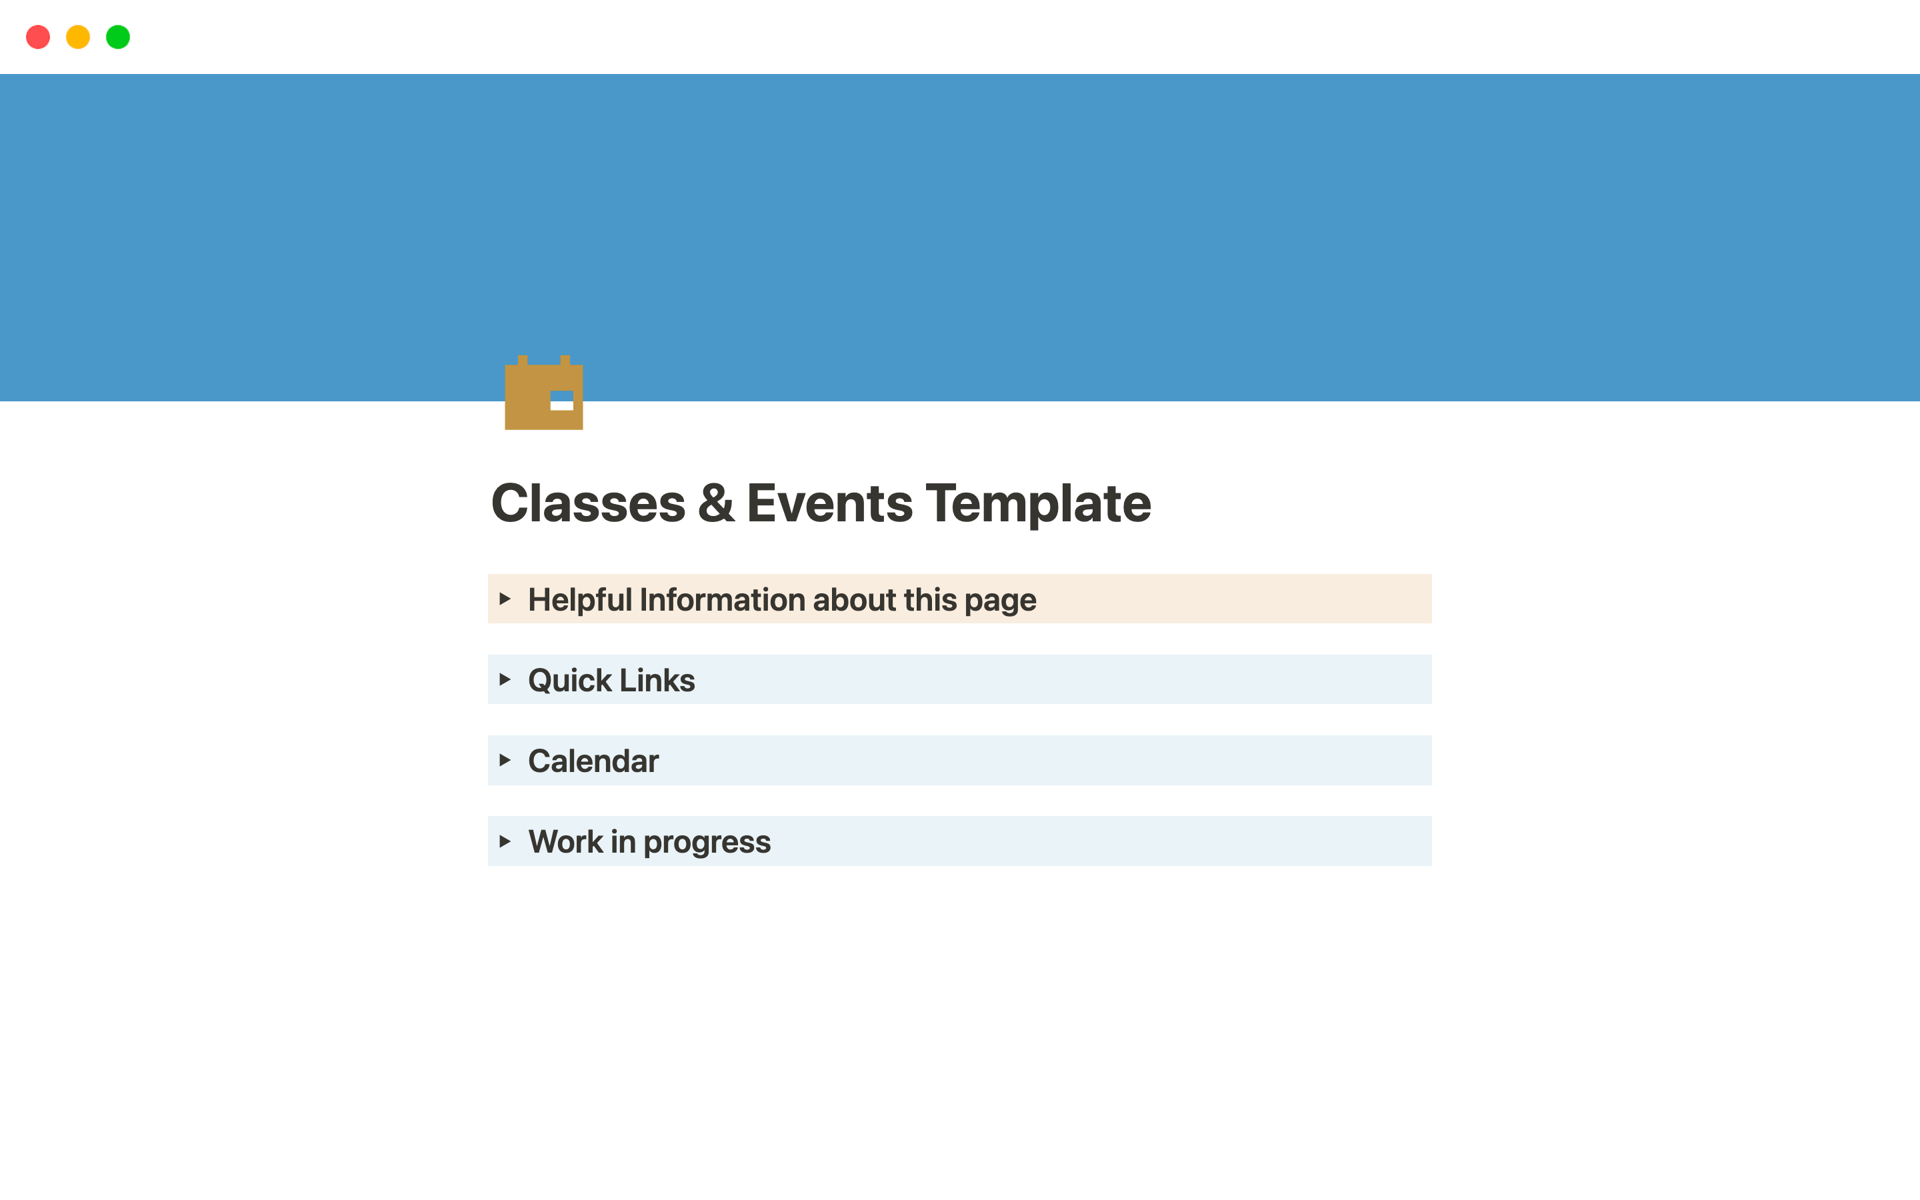  This is a smaller package of templates that can help you manage your classes & events as a teacher. 